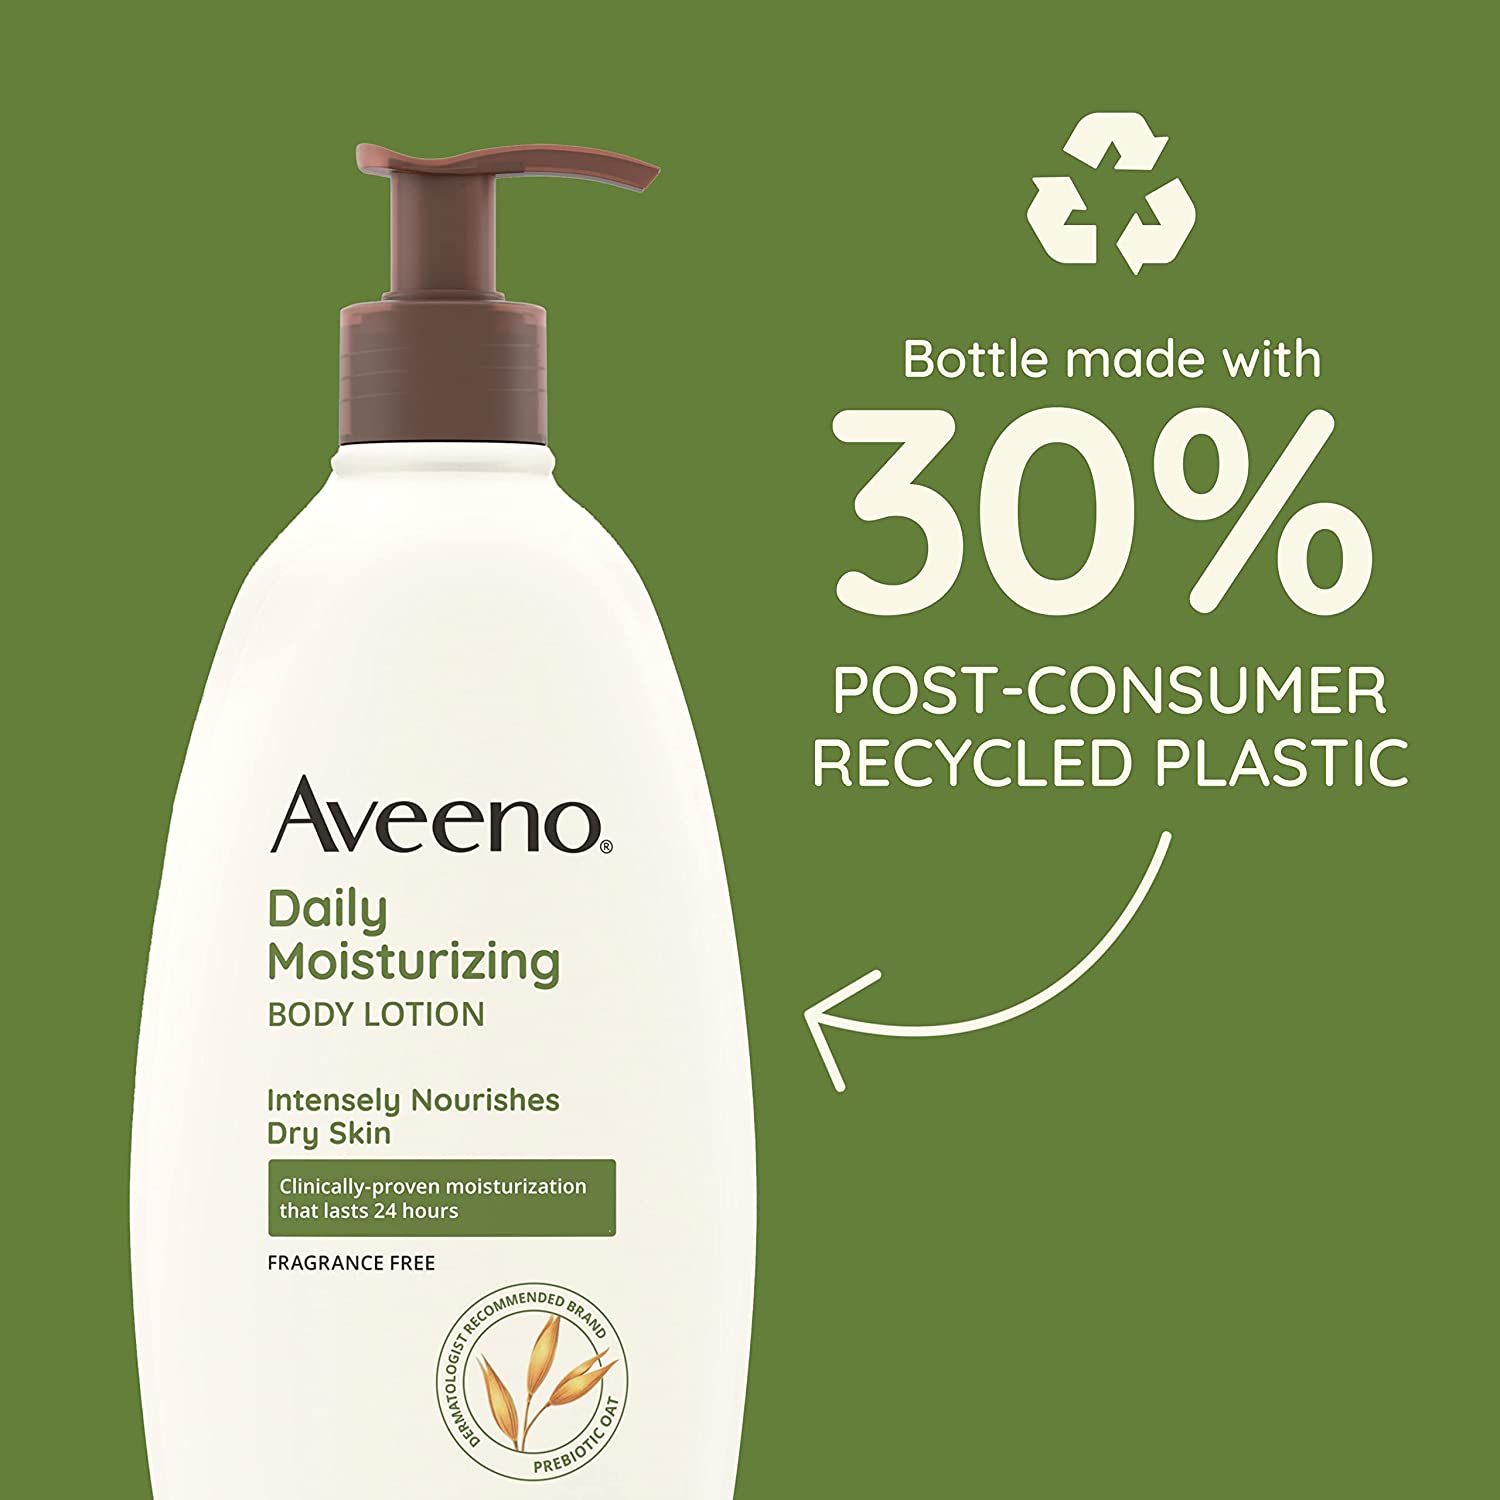 Aveeno Daily Moisturizing Body Lotion with Soothing Oat and Rich Emollients to Nourish Dry Skin, Fragrance-Free, 18 fl. oz 18 Fl Oz (Pack of 1) - image 2 of 6